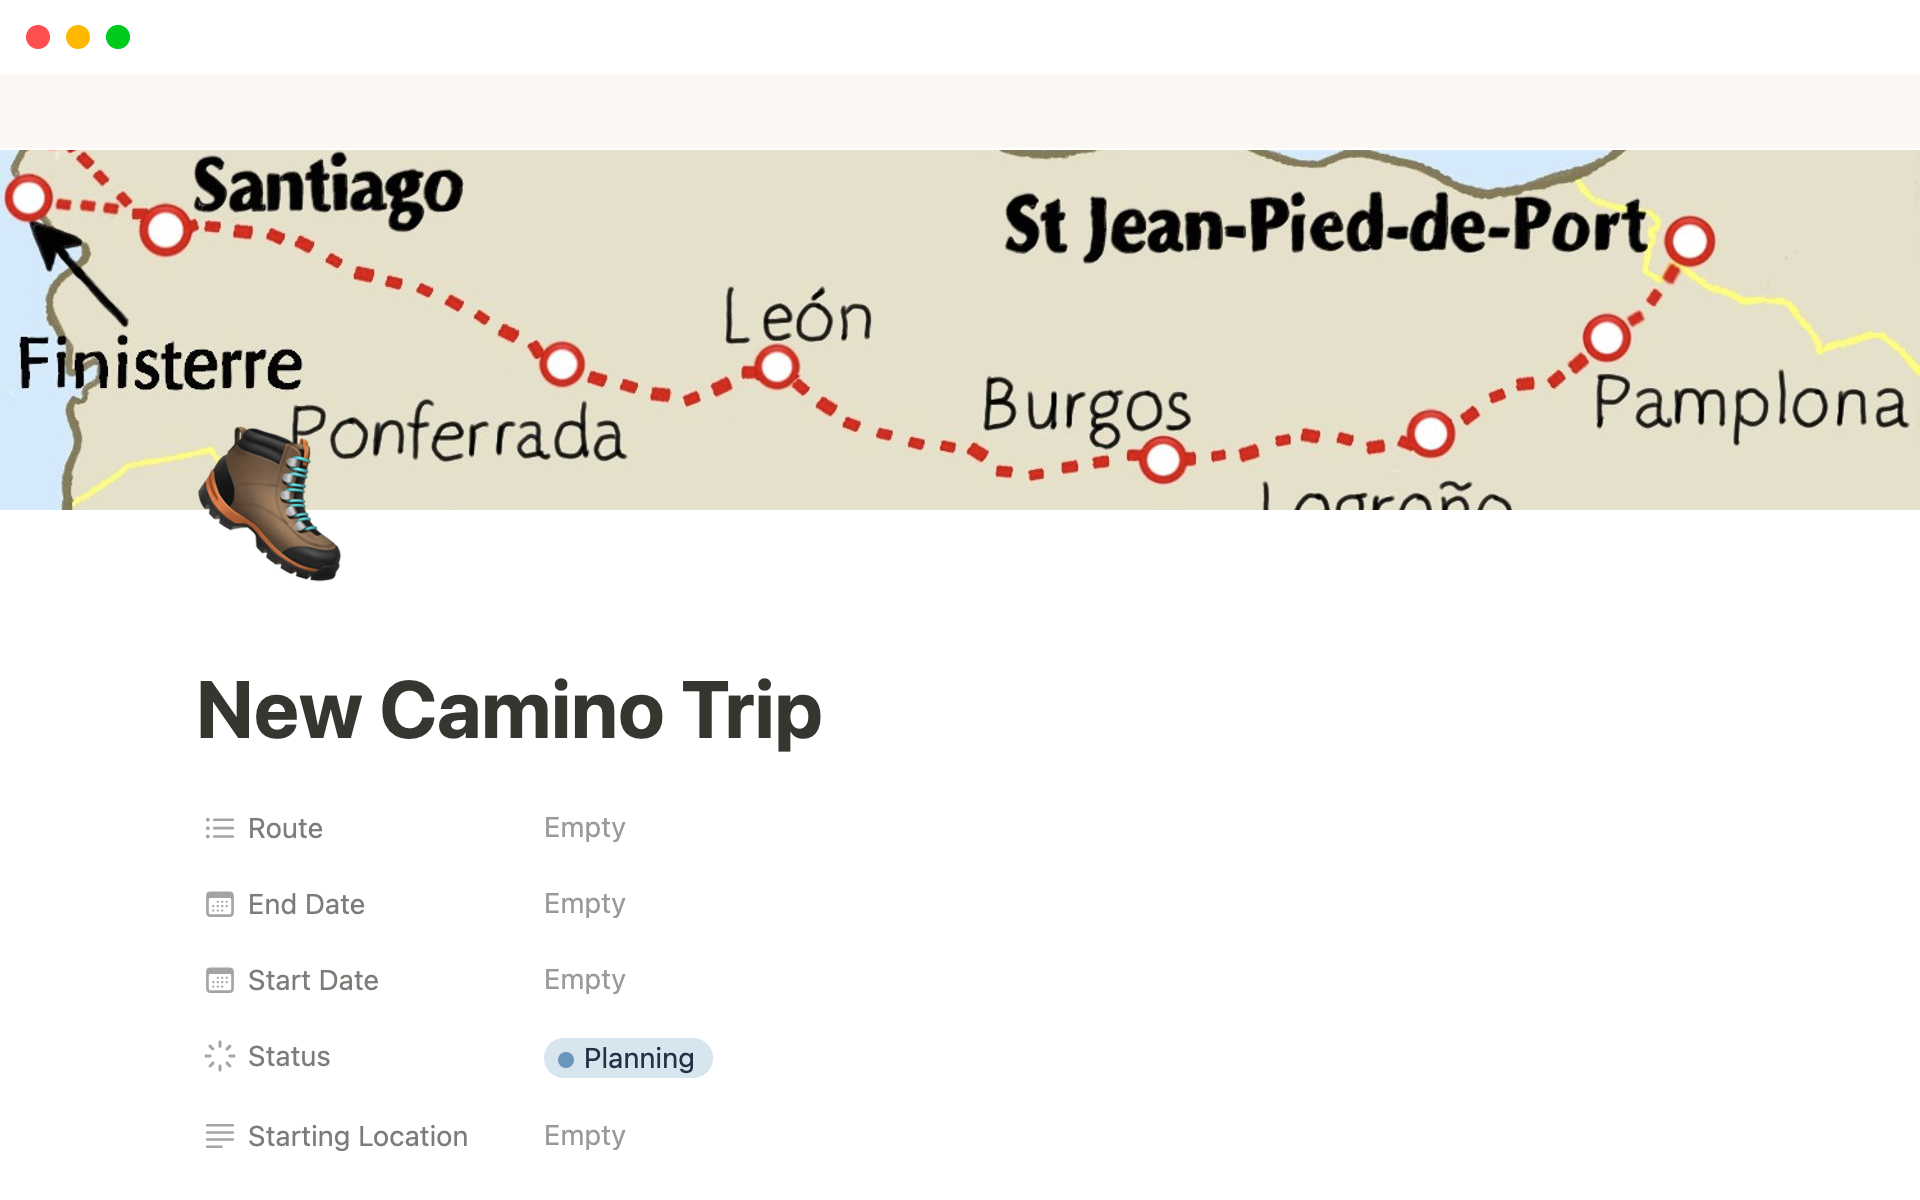 The Camino Planner is a Notion template designed to help plan, prepare, and navigate the Camino de Santiago pilgrimage.